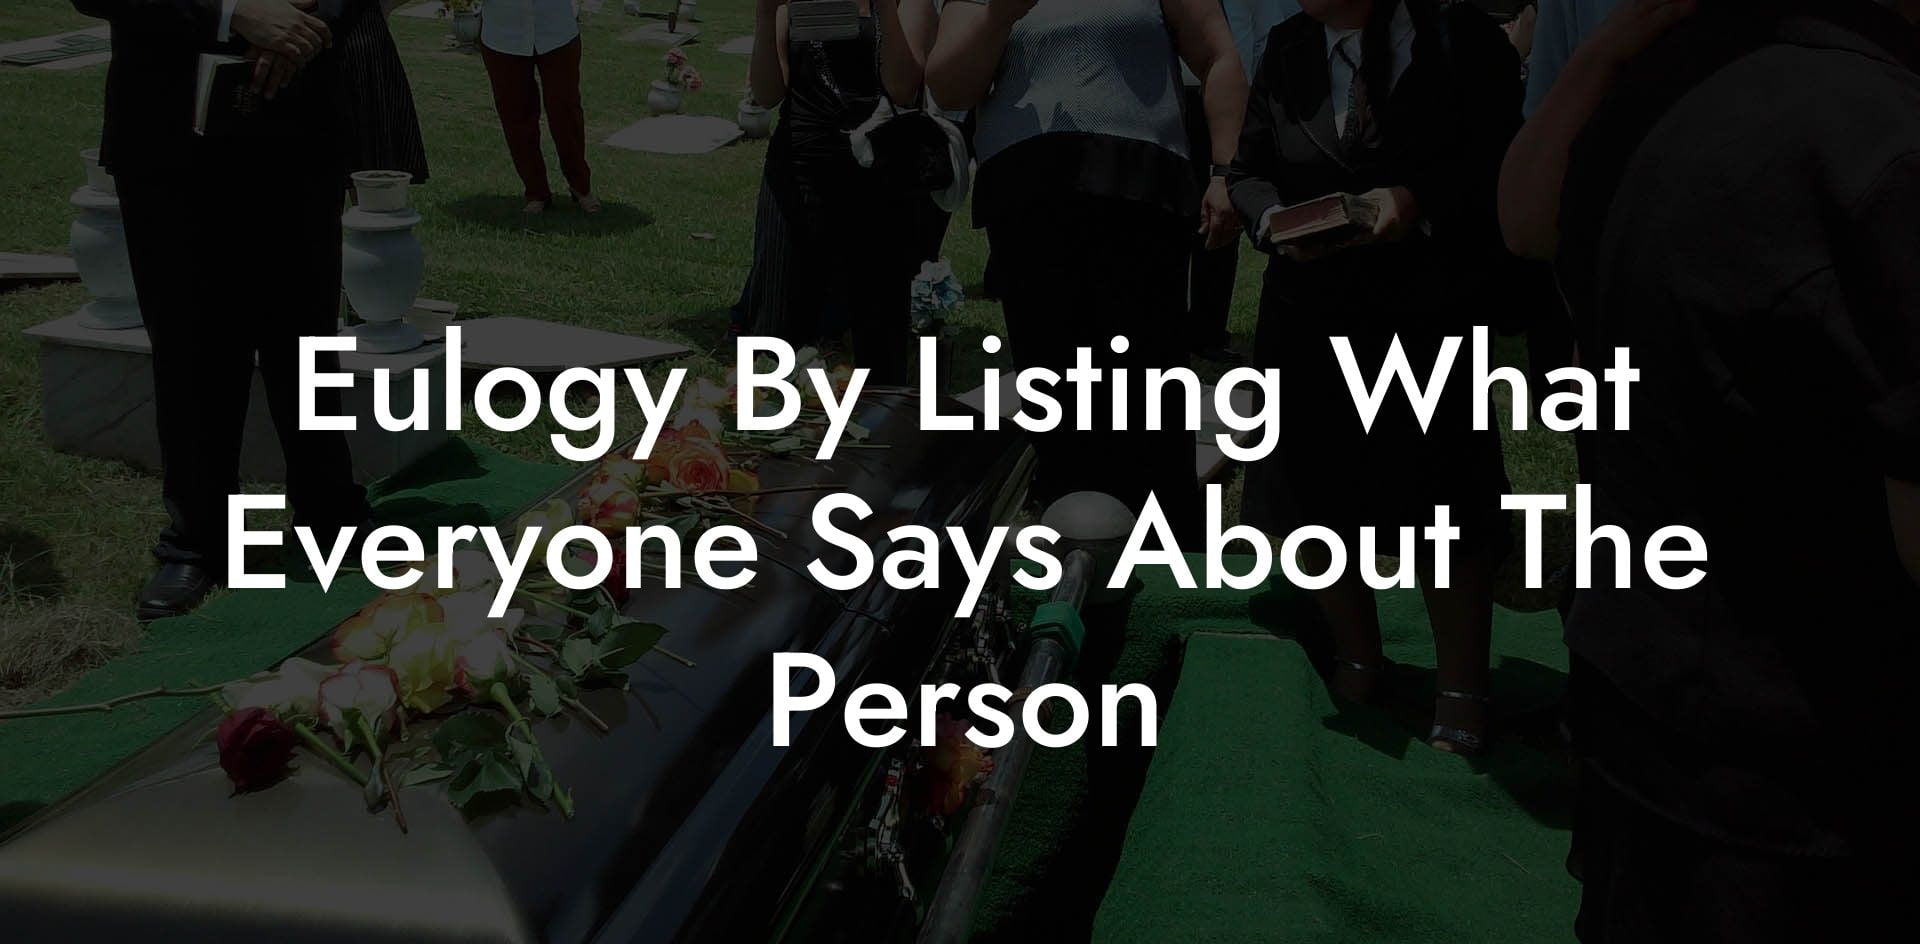 Eulogy By Listing What Everyone Says About The Person